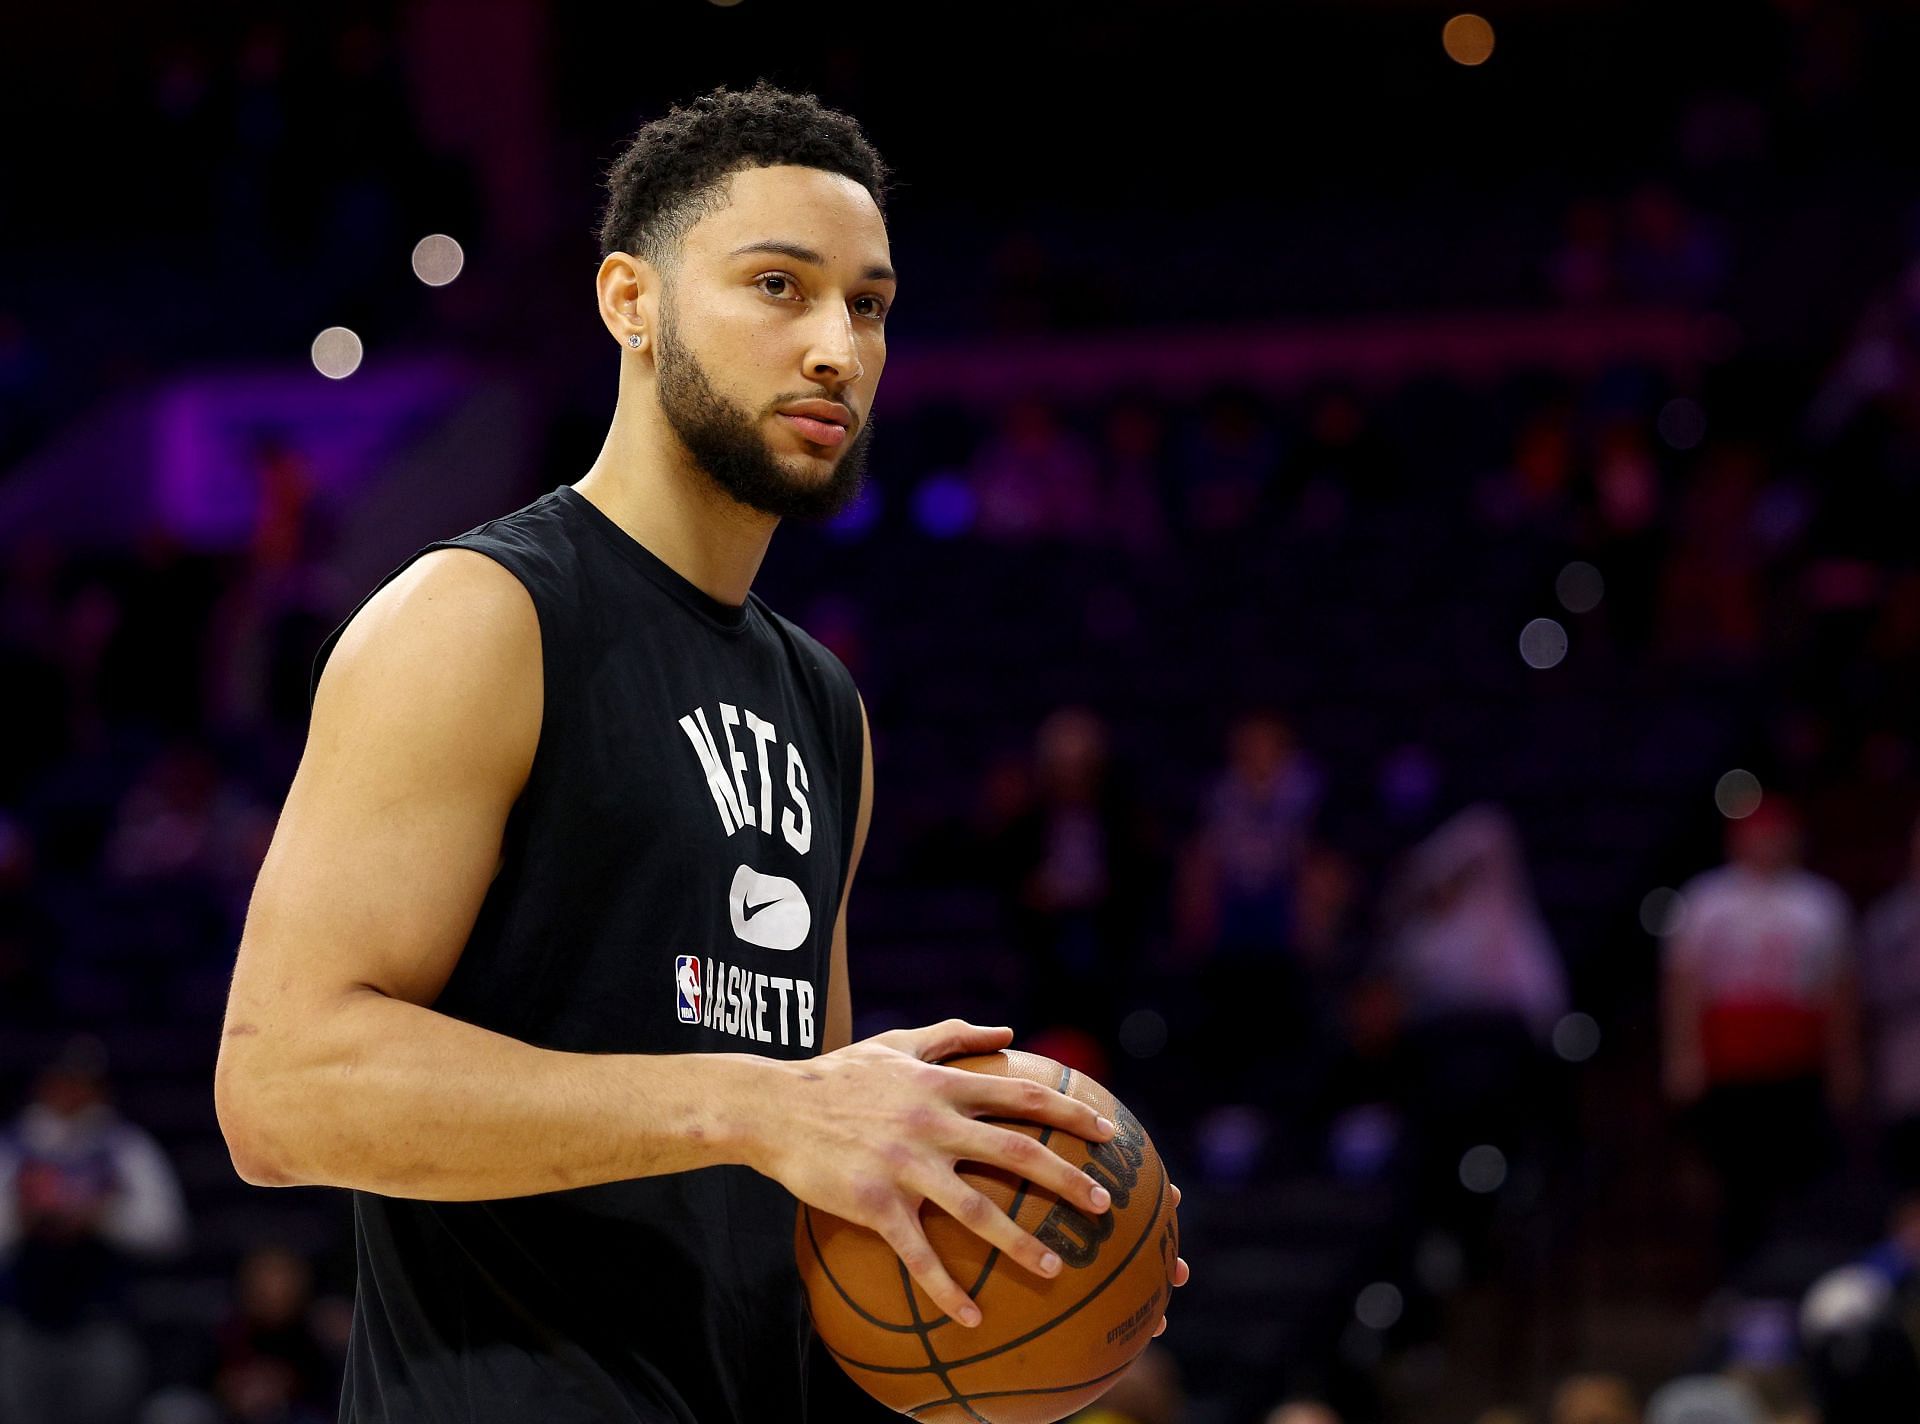 WATCH: Ben Simmons' cheeky play and dunk in 76ers win